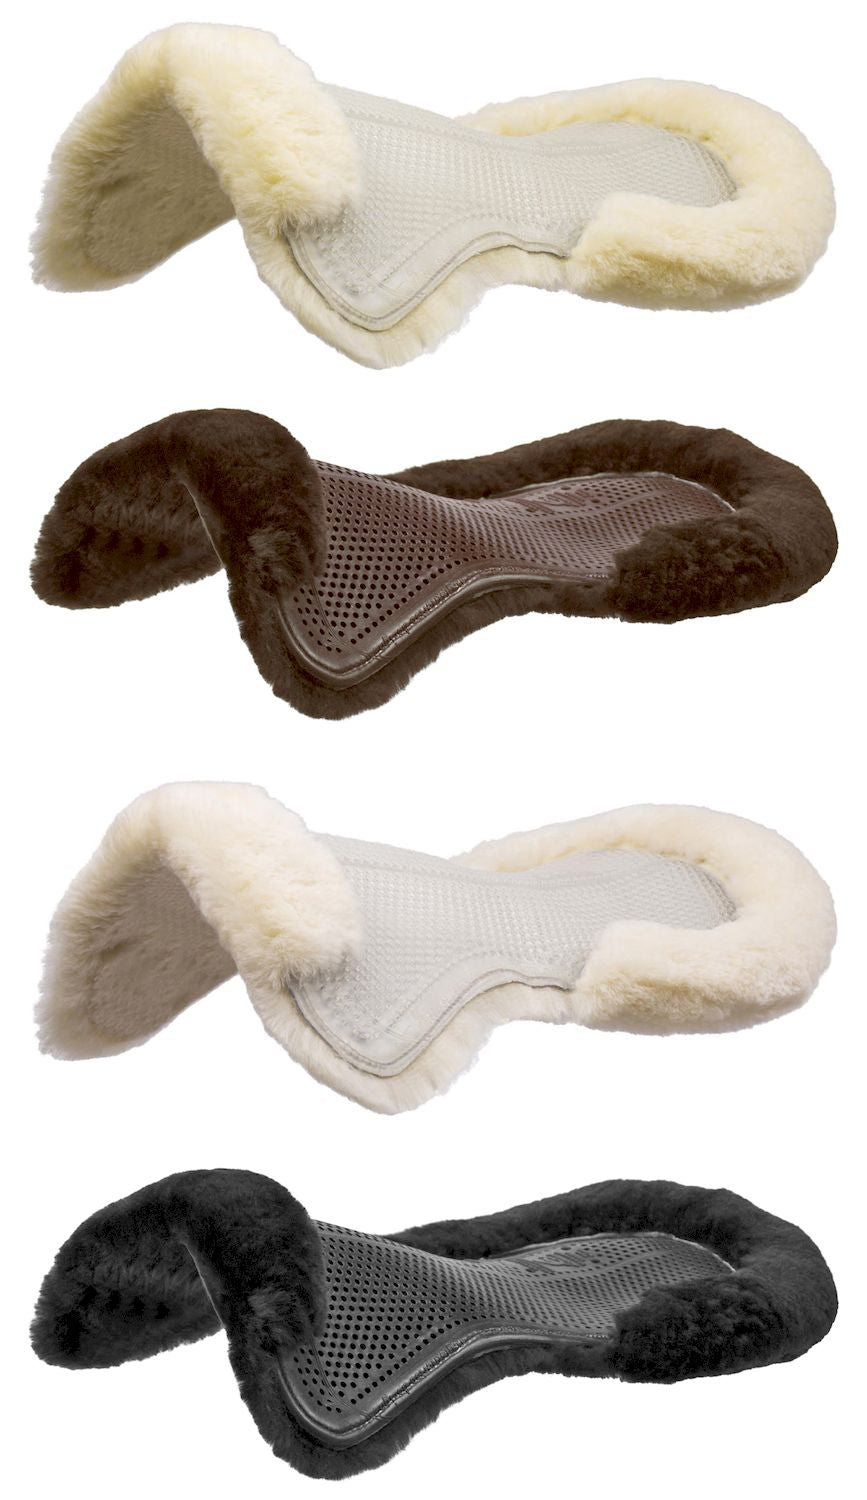 Therapeutic Gel Pad with Full Sheepskin